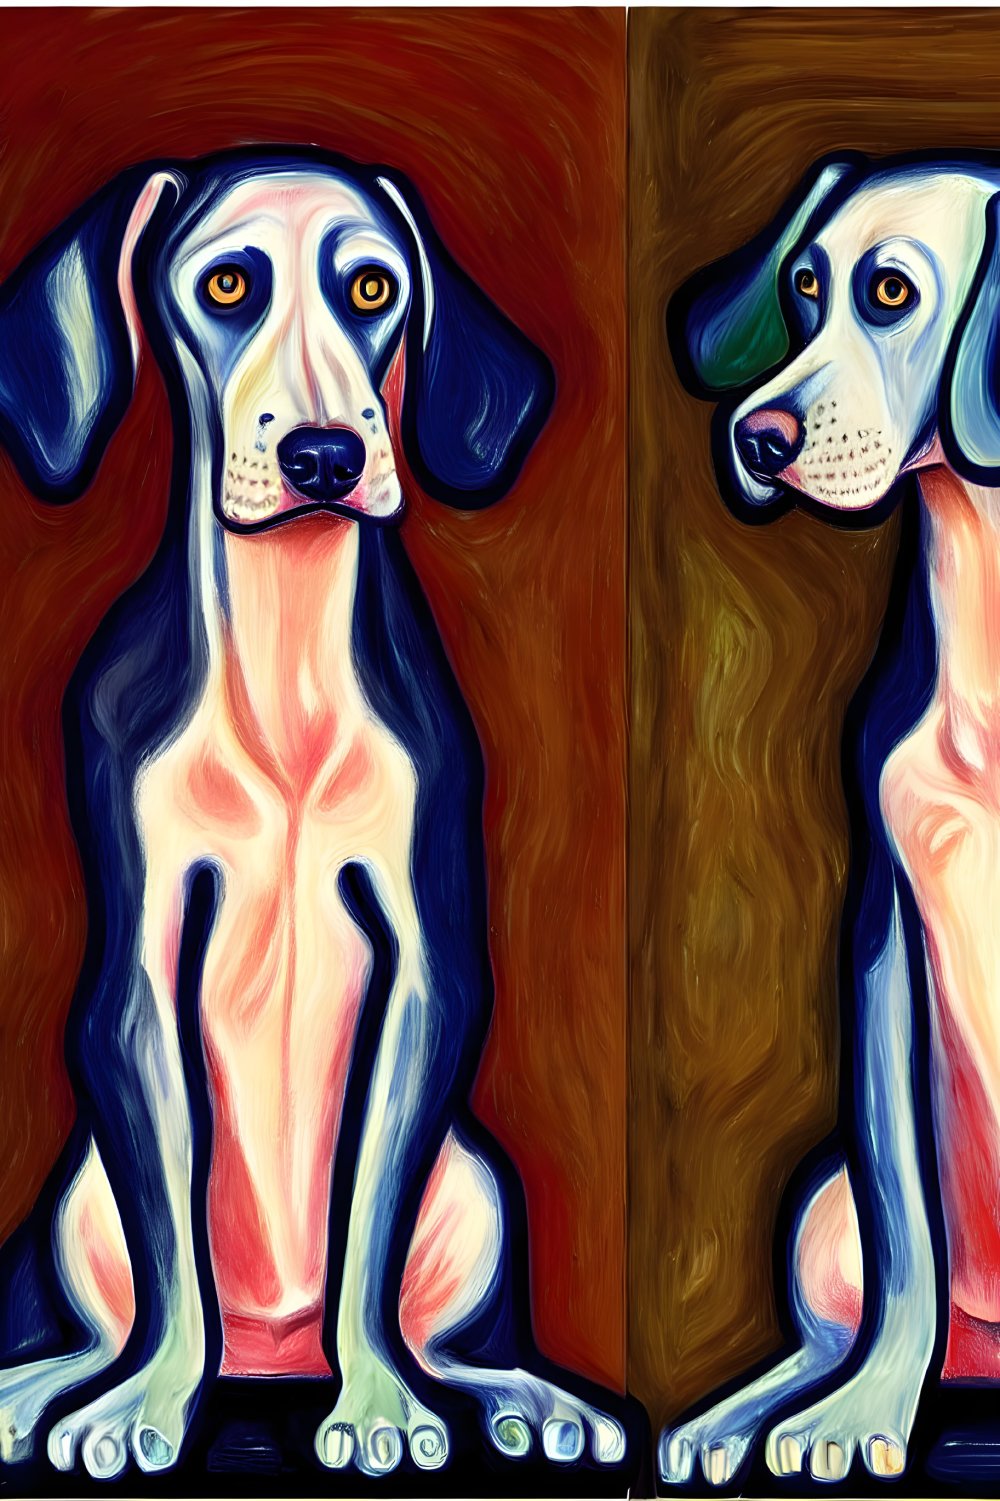 Stylized dog paintings with expressive eyes and vibrant colors